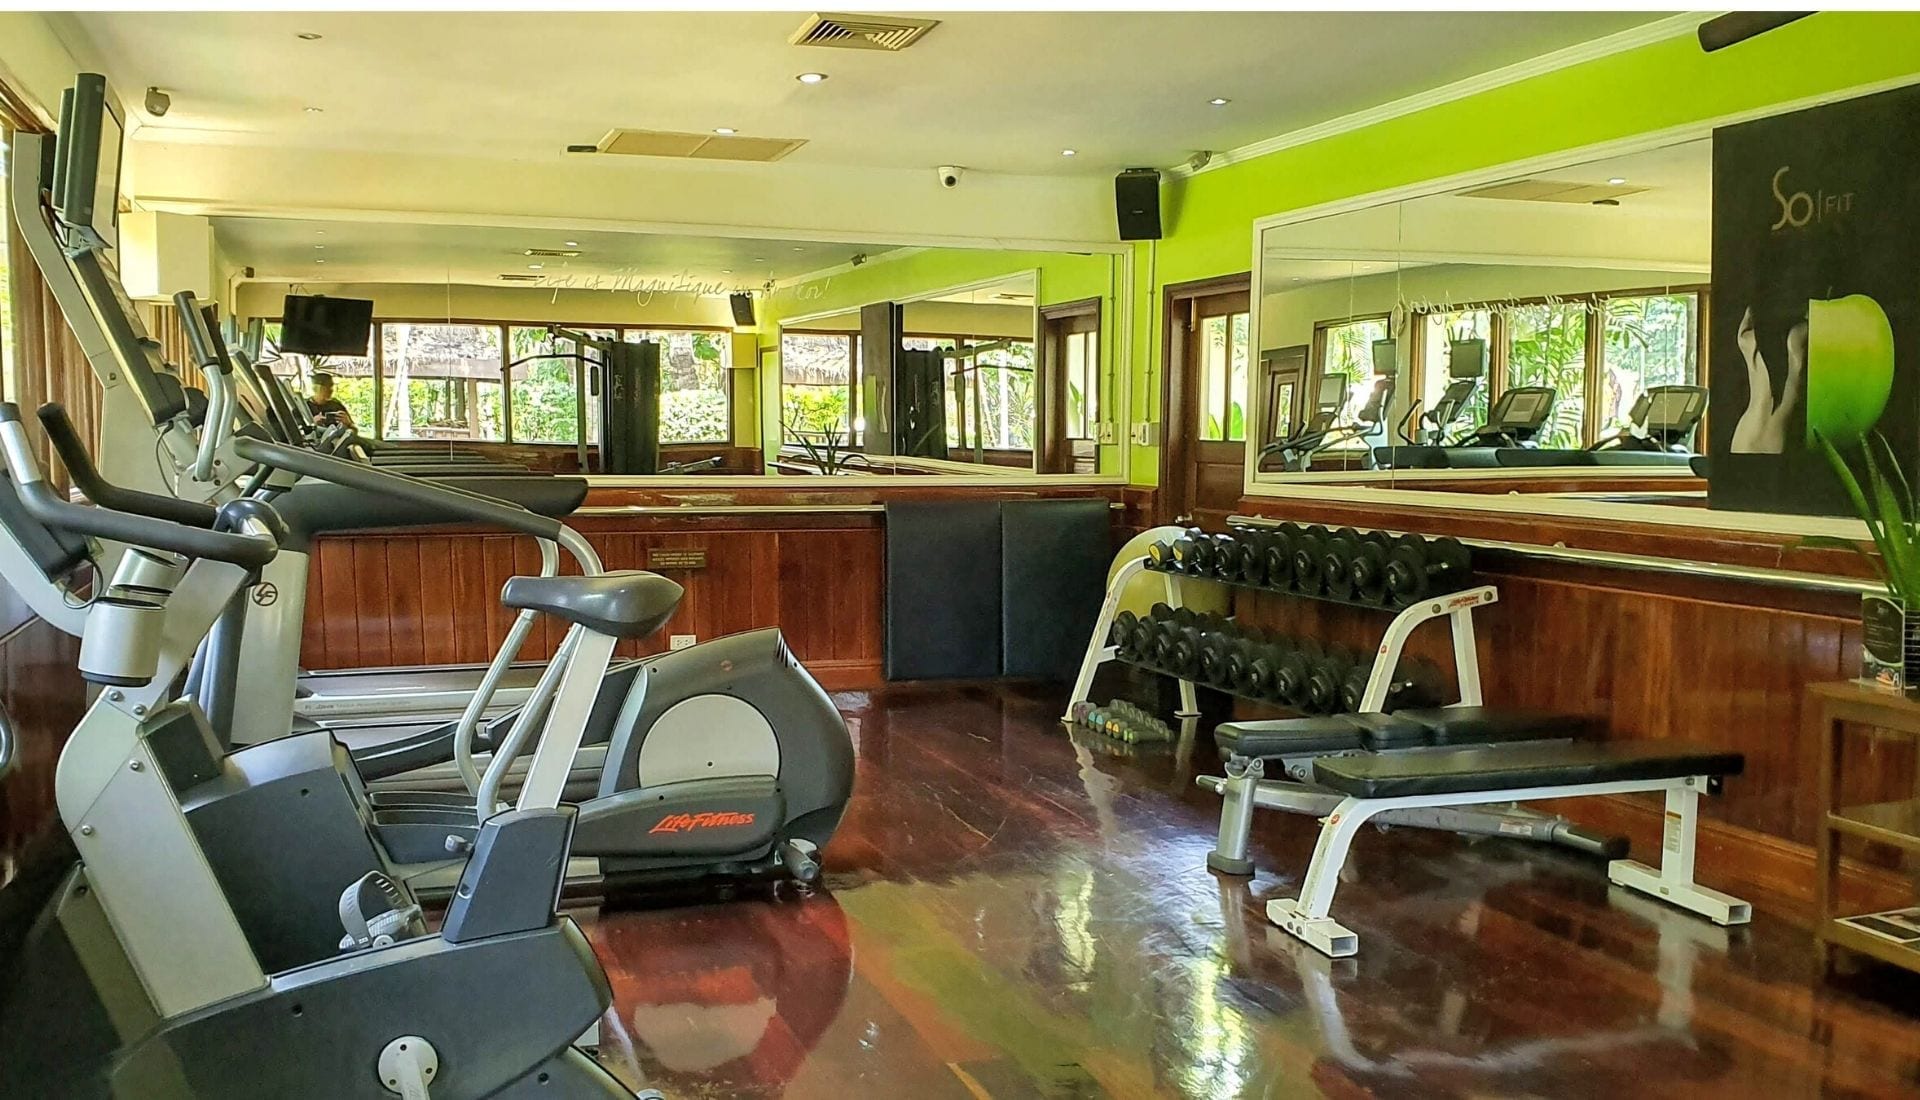 The Gym at the Sofitel